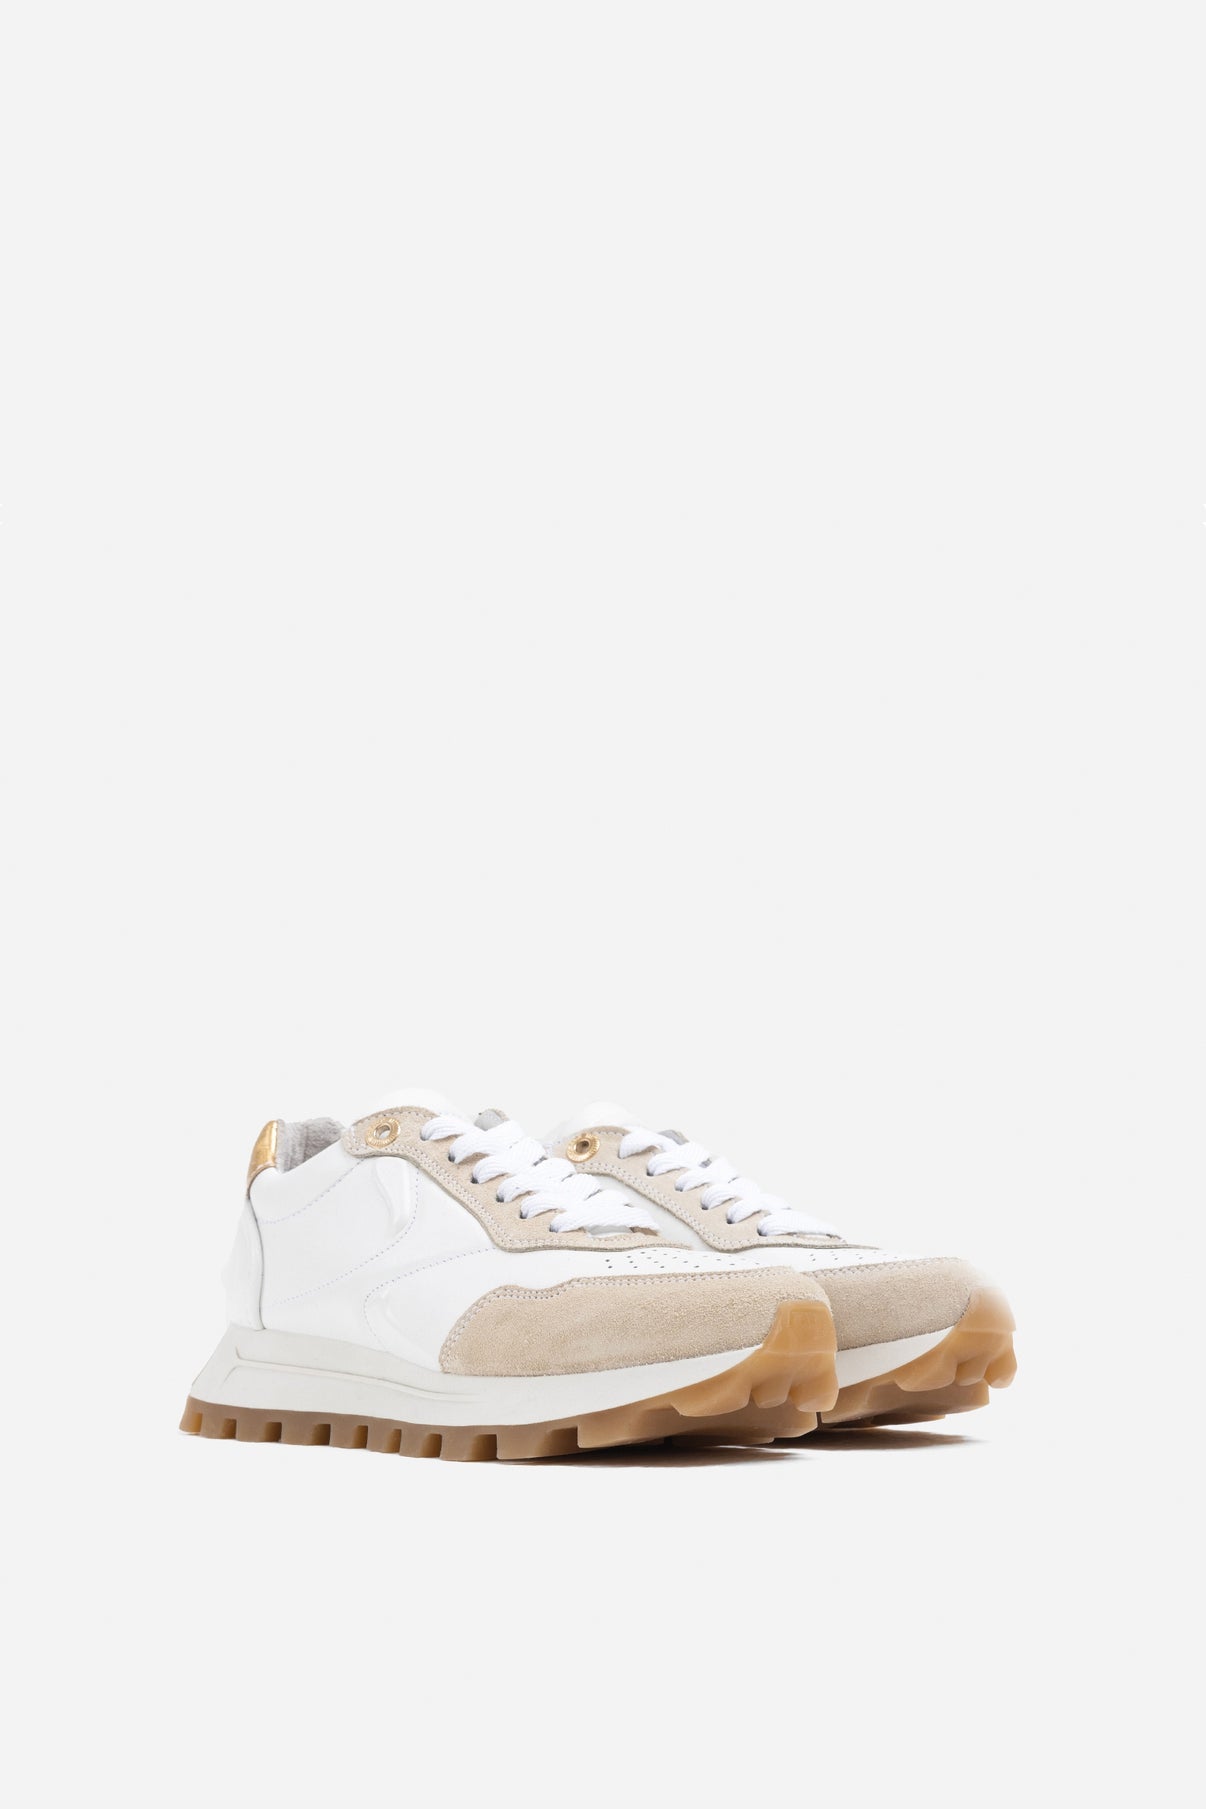 Avery Off White Gold Chunky Sneakers 66454-BA-3677 - 2